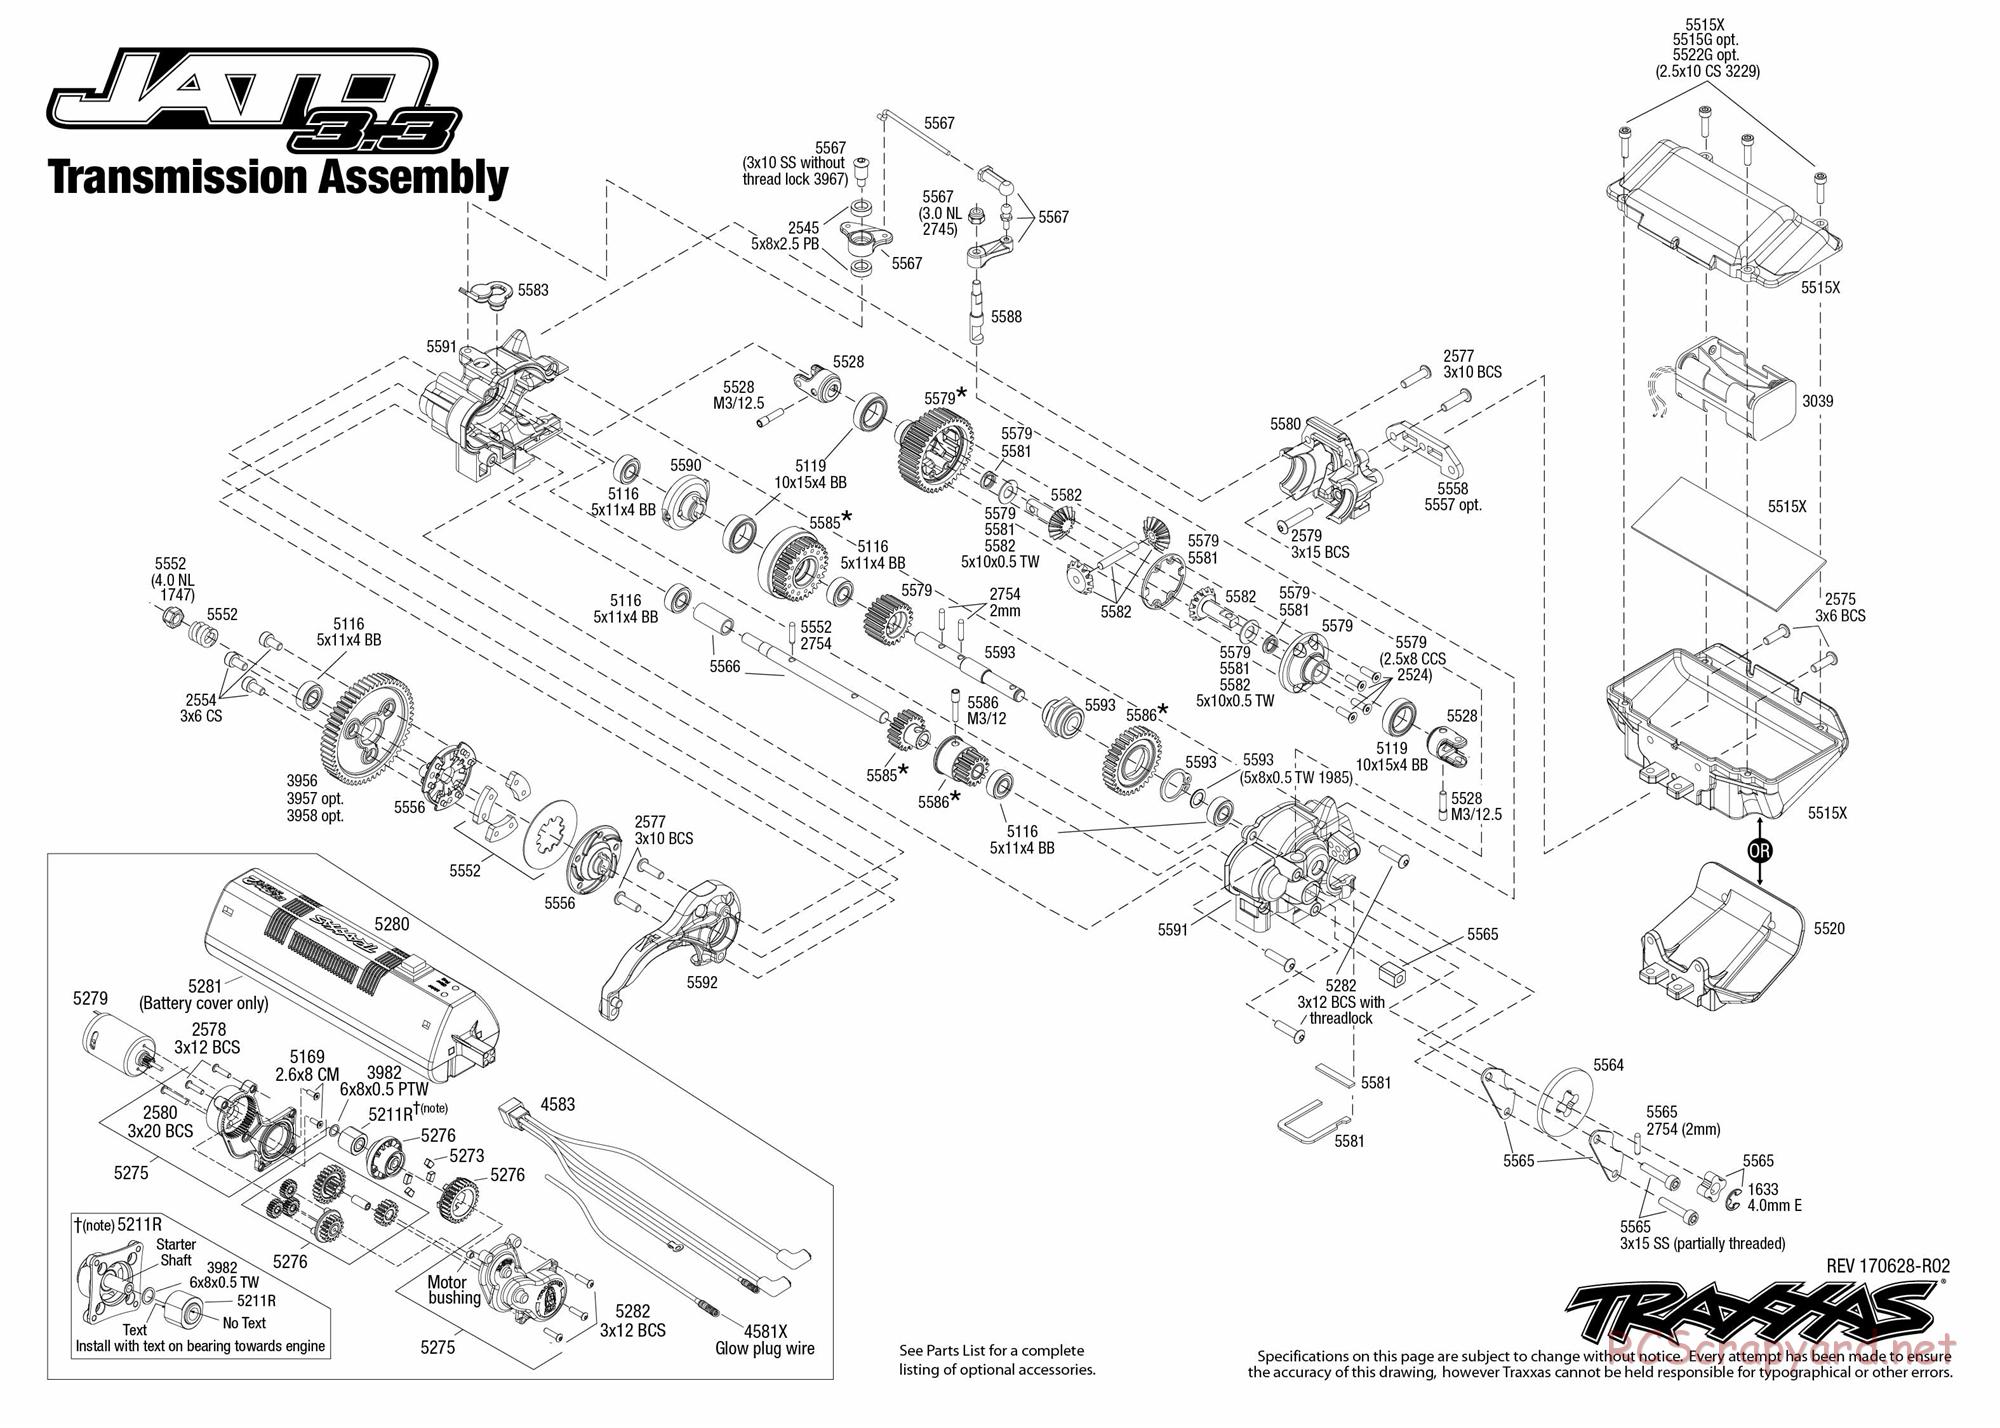 Traxxas - Jato 3.3 (2015) - Exploded Views - Page 5